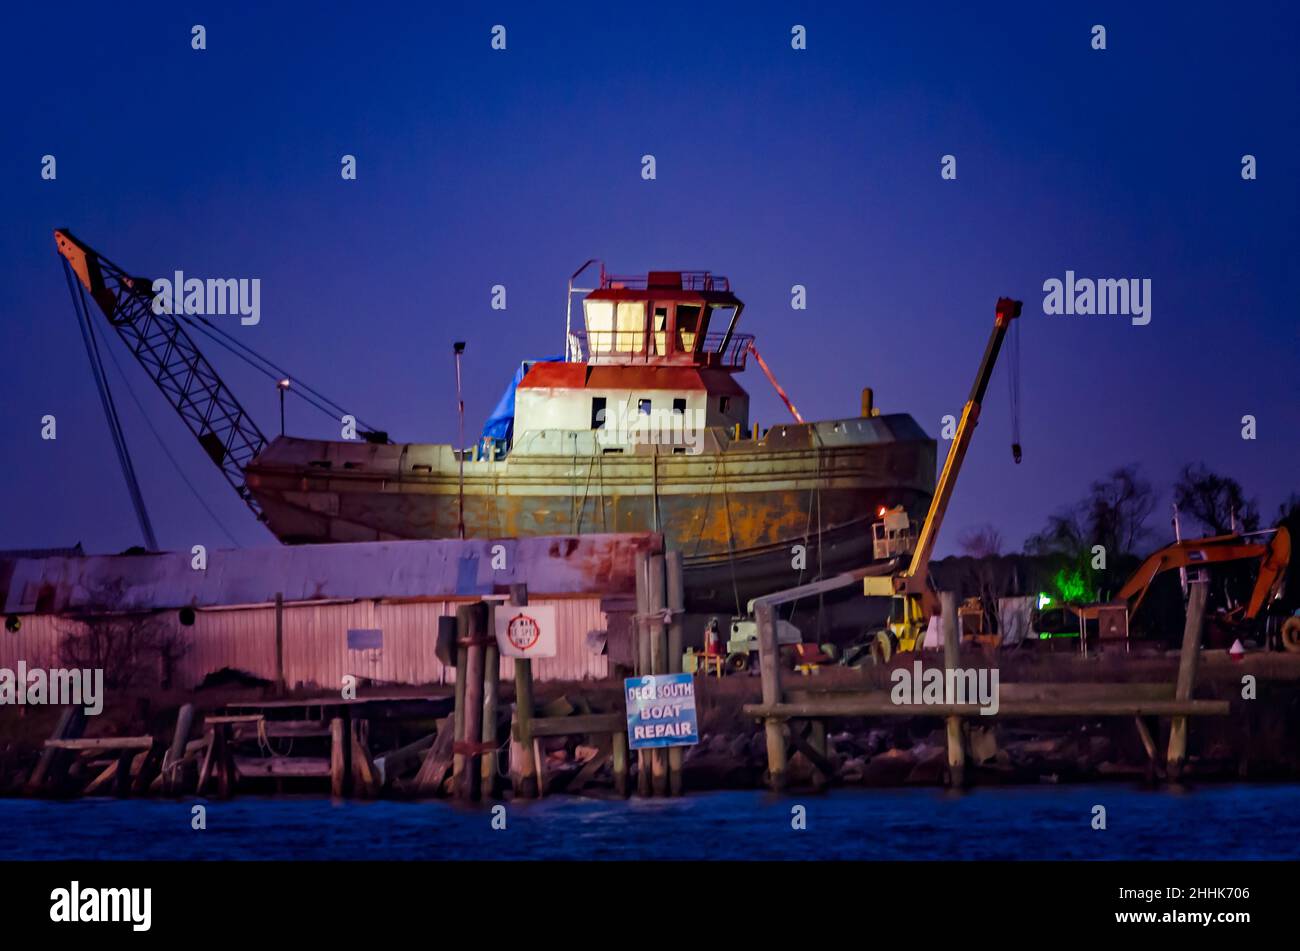 A boat is built at a local shipyard, Jan. 4, 2017, in Bayou La Batre, Alabama. The community’s main industries are shipbuilding and commercial seafood. Stock Photo